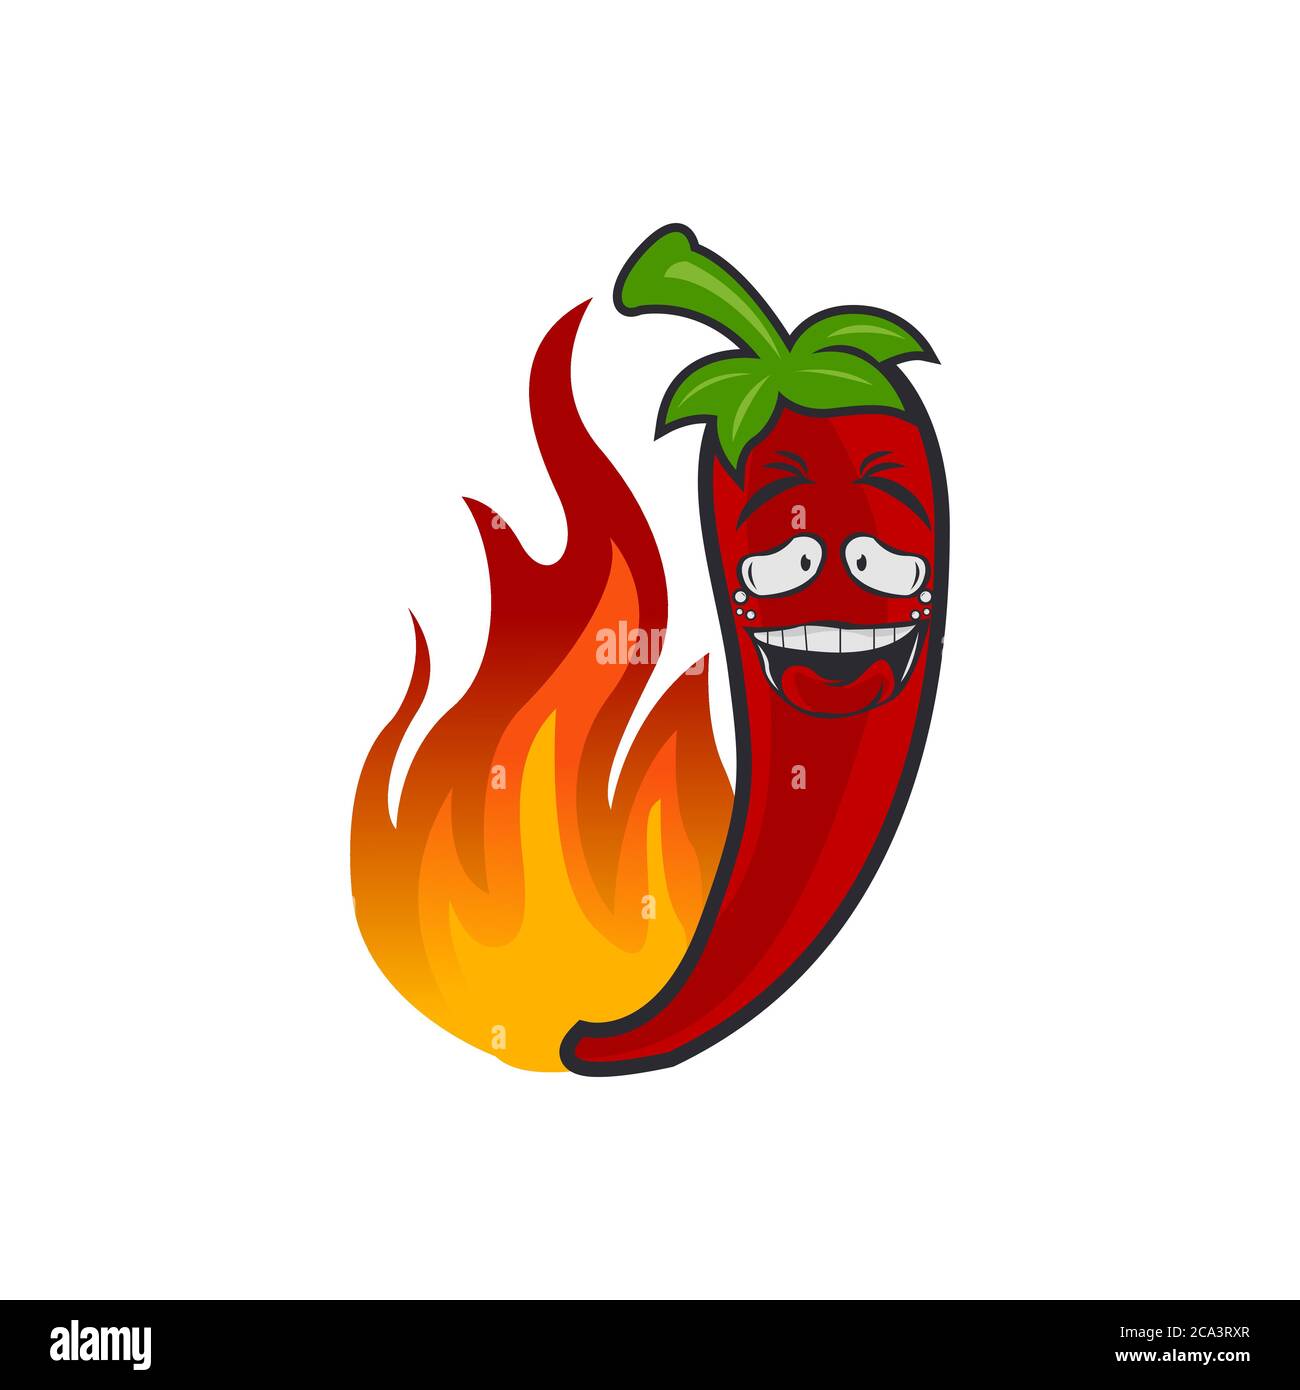 Red chili pepper cartoon mascot breathing flames vector illustration Stock Vector